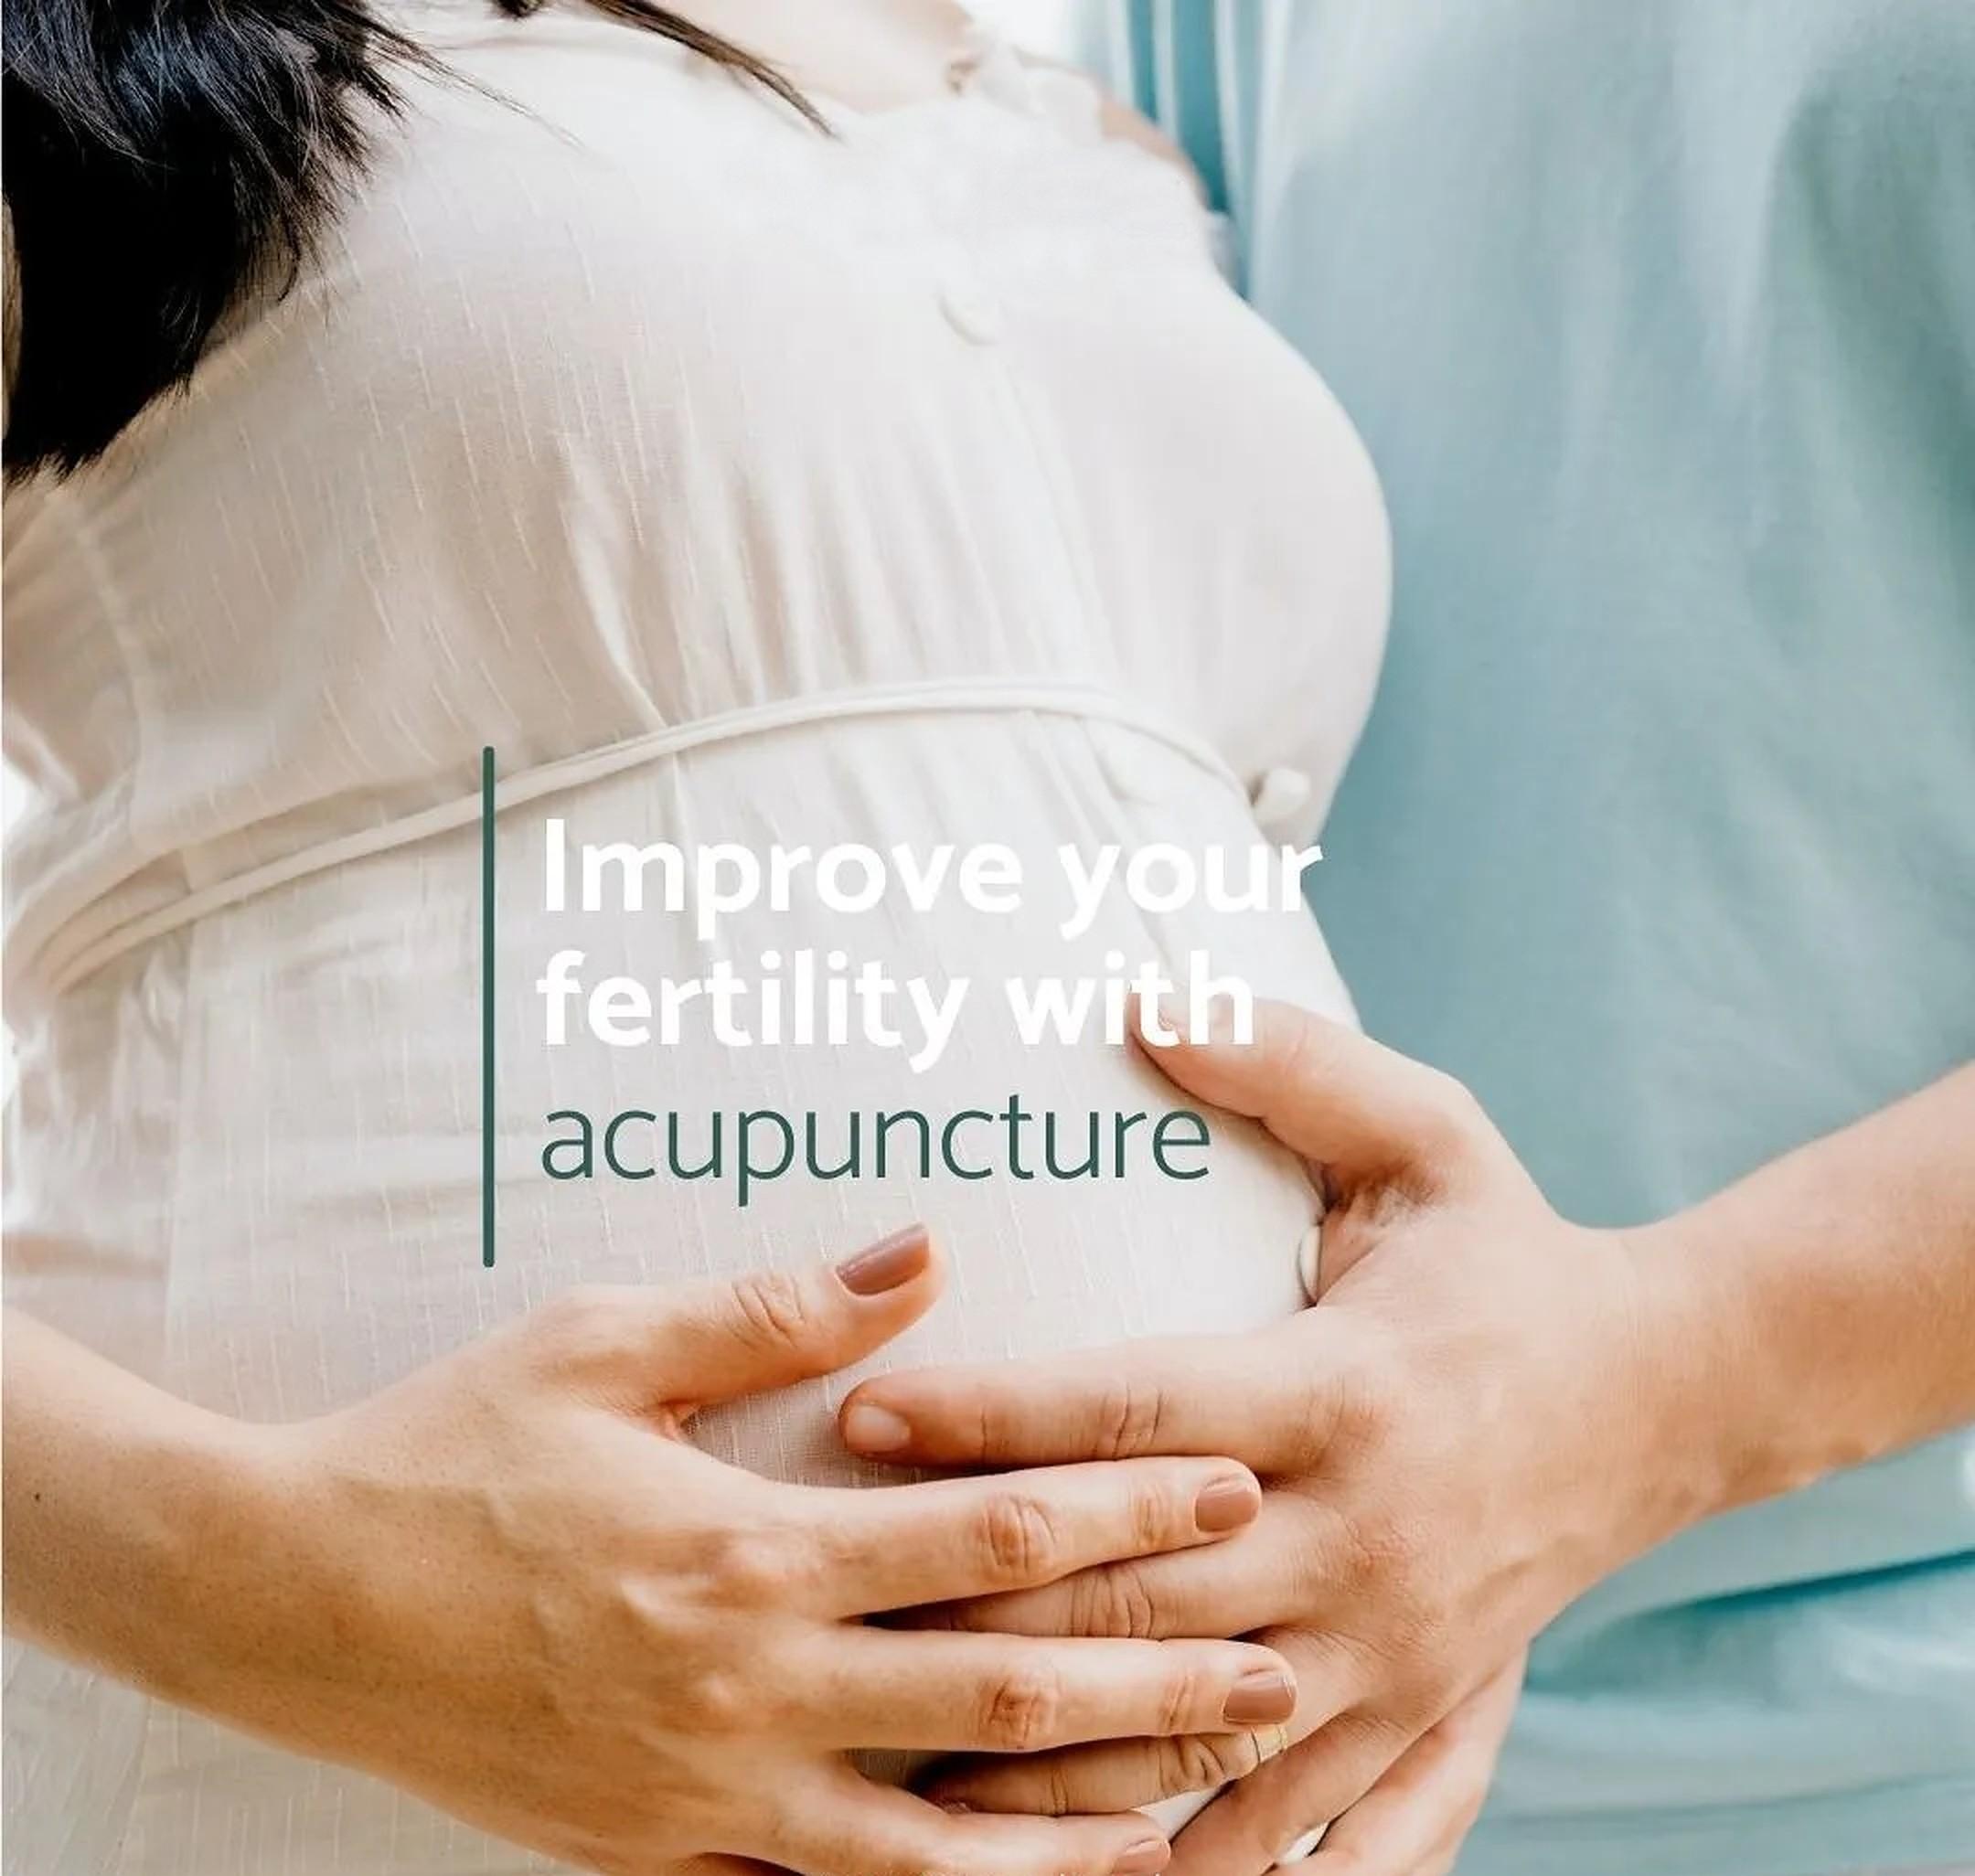 Female Fertility Acupuncture In Colleyville, TX Improves Reproductive System